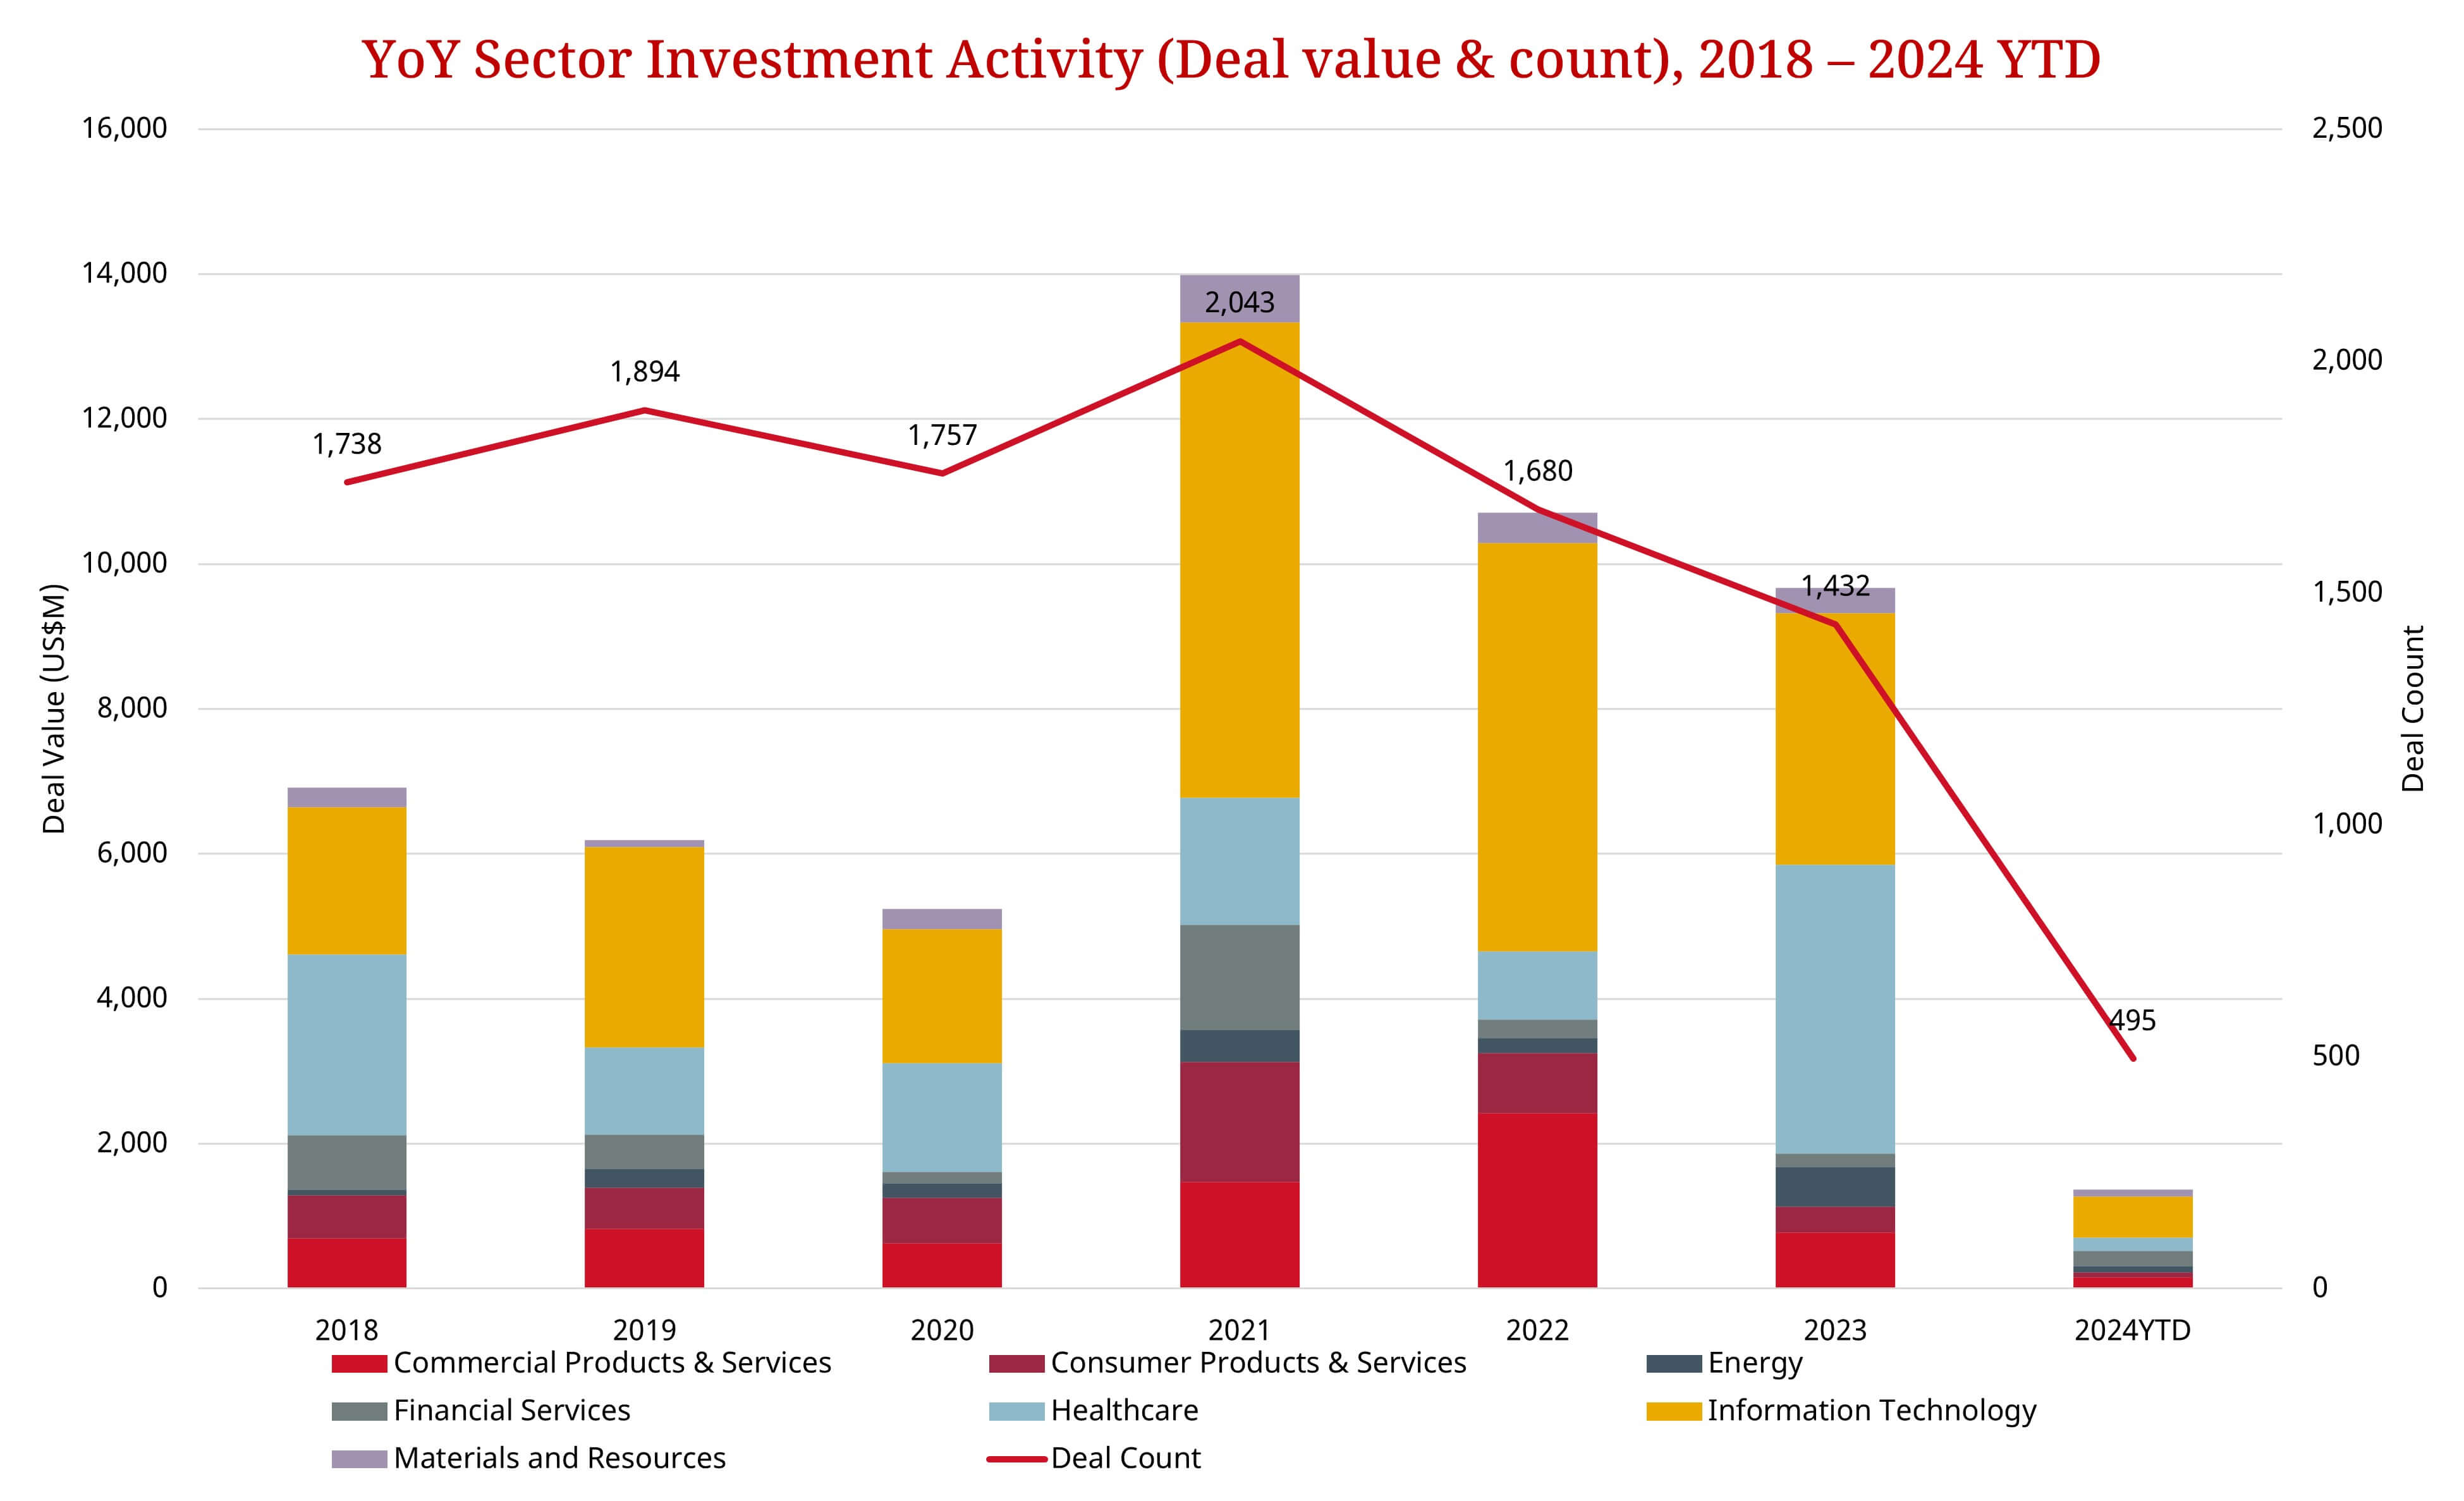 YoY Sector Investment Activity (Deal value and count), 2018 to 2024 YTD